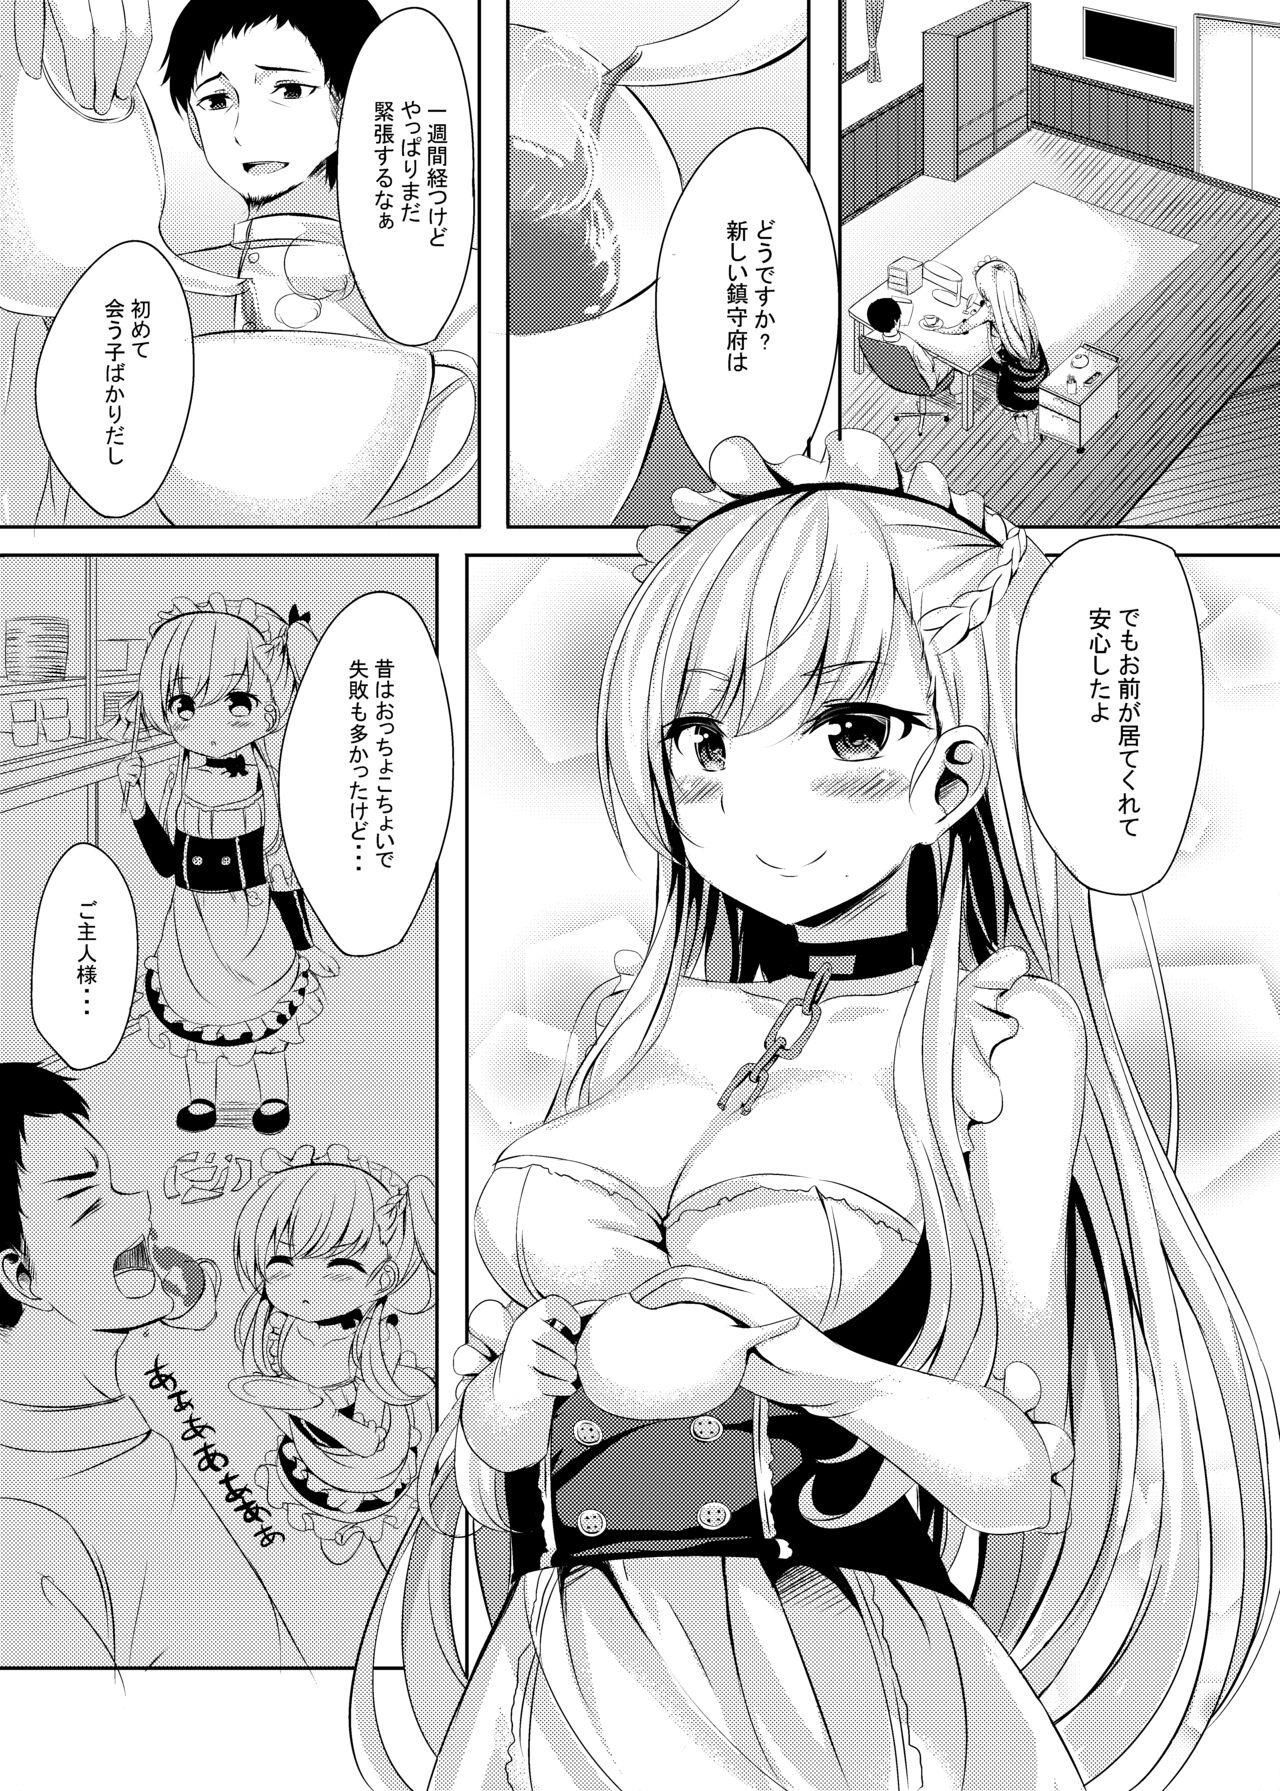 Foot Fetish ring the bell - Azur lane Str8 - Page 3